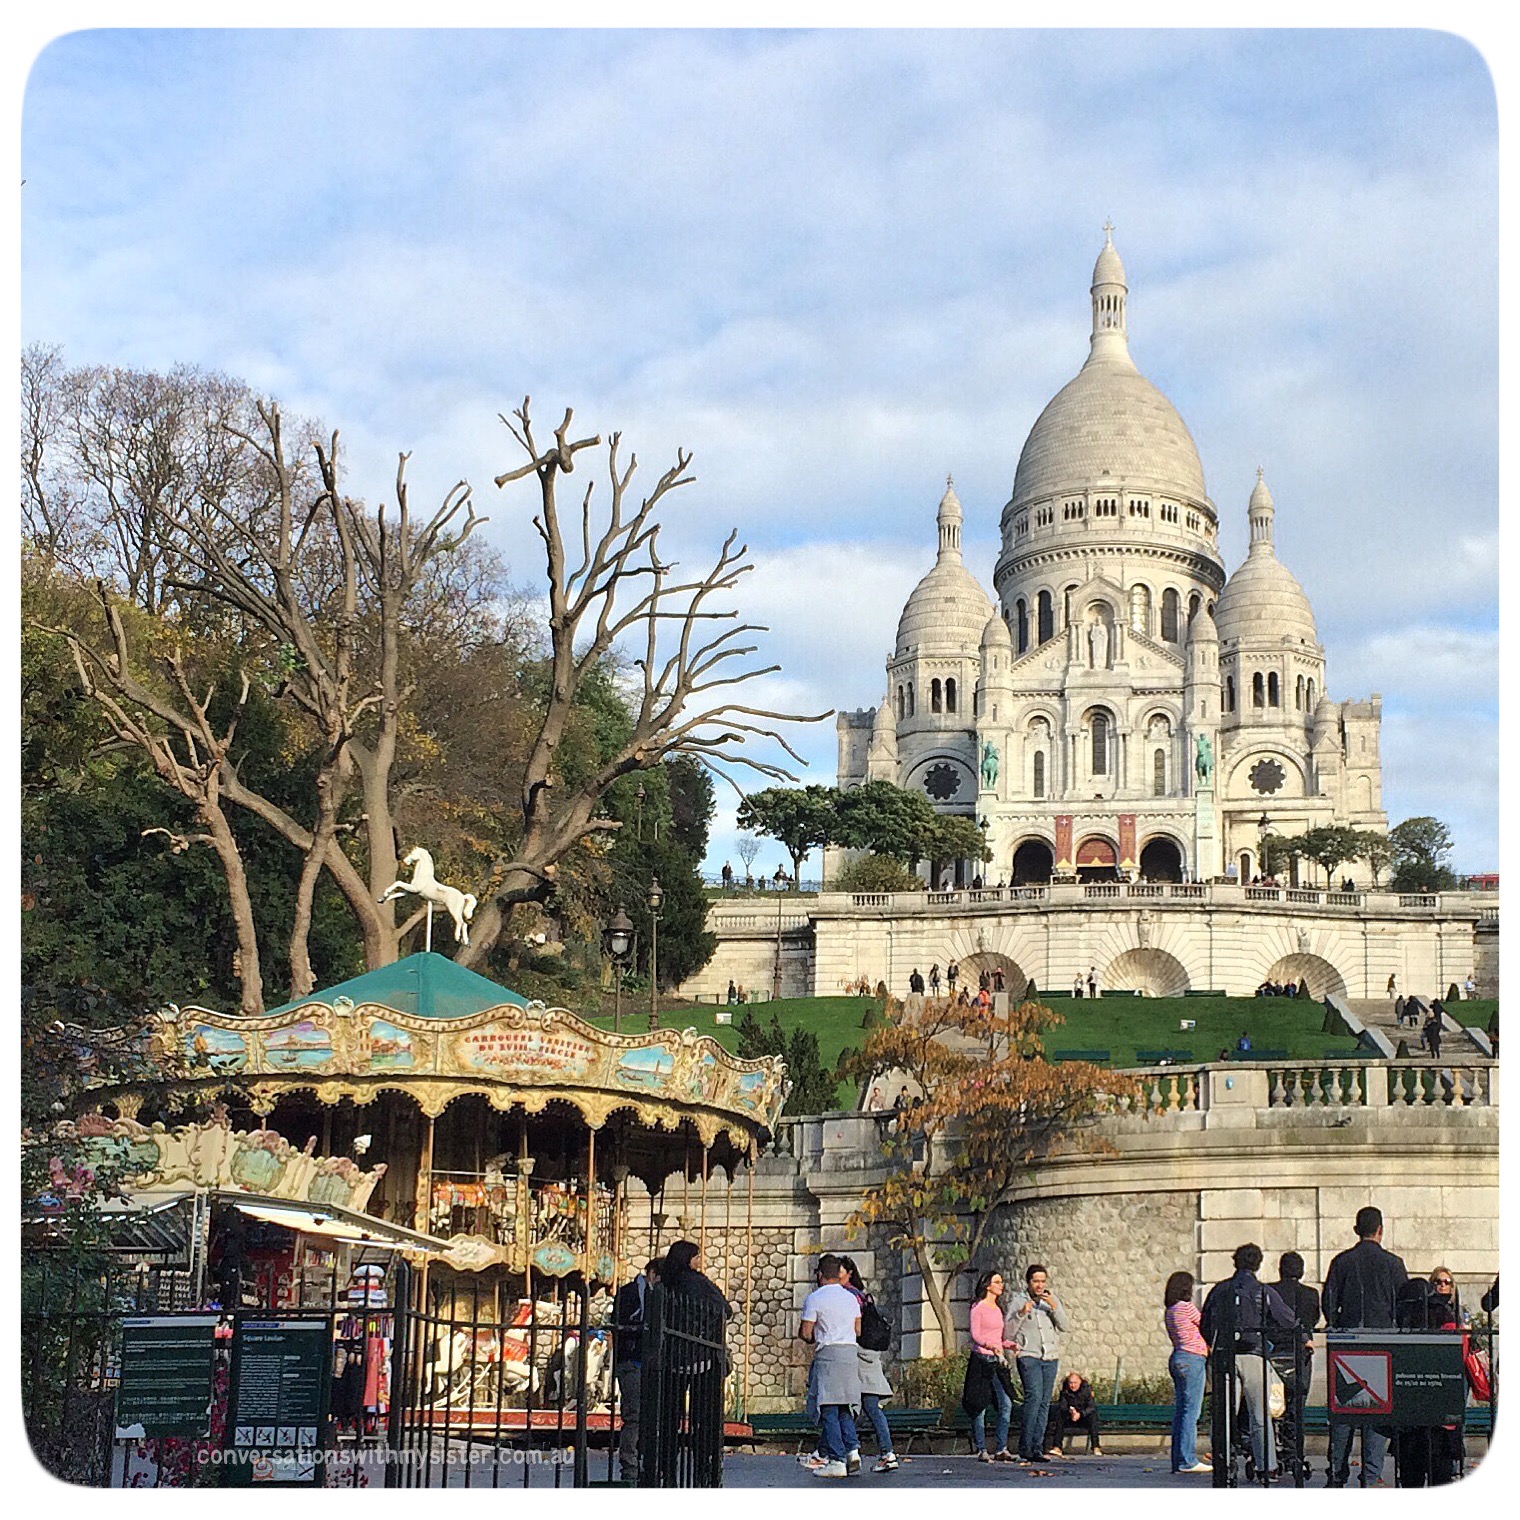 This article is not only full of wistful Paris imagery but also informative links, useful tips, practical advice and a couple of #hiddengems. The perfect 6 day itinerary for families travelling to Europe and visiting the French Capital.